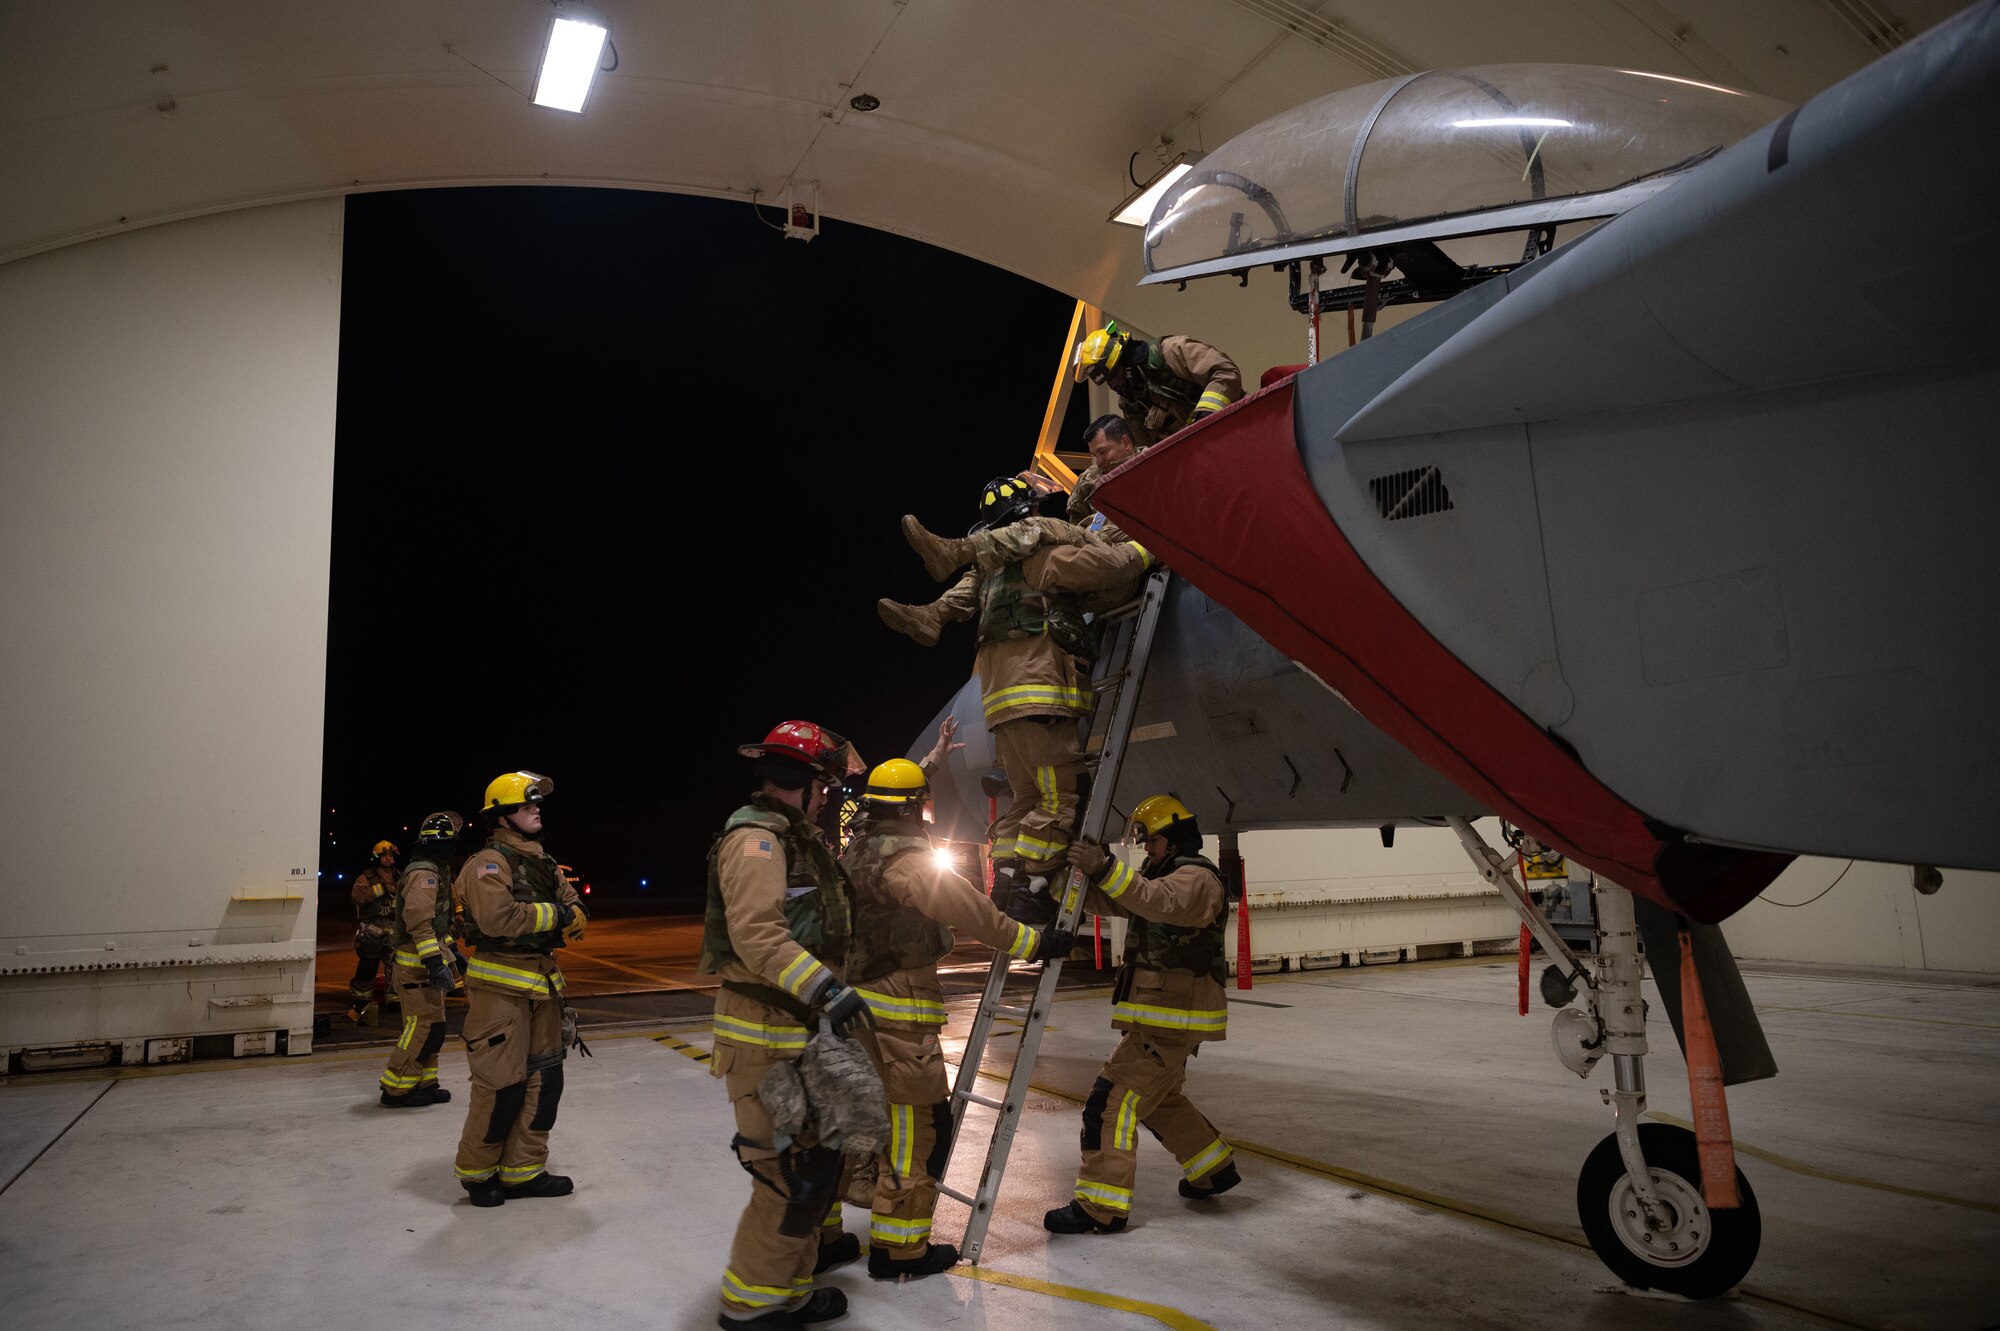 Firefighters carry Airman from aircraft